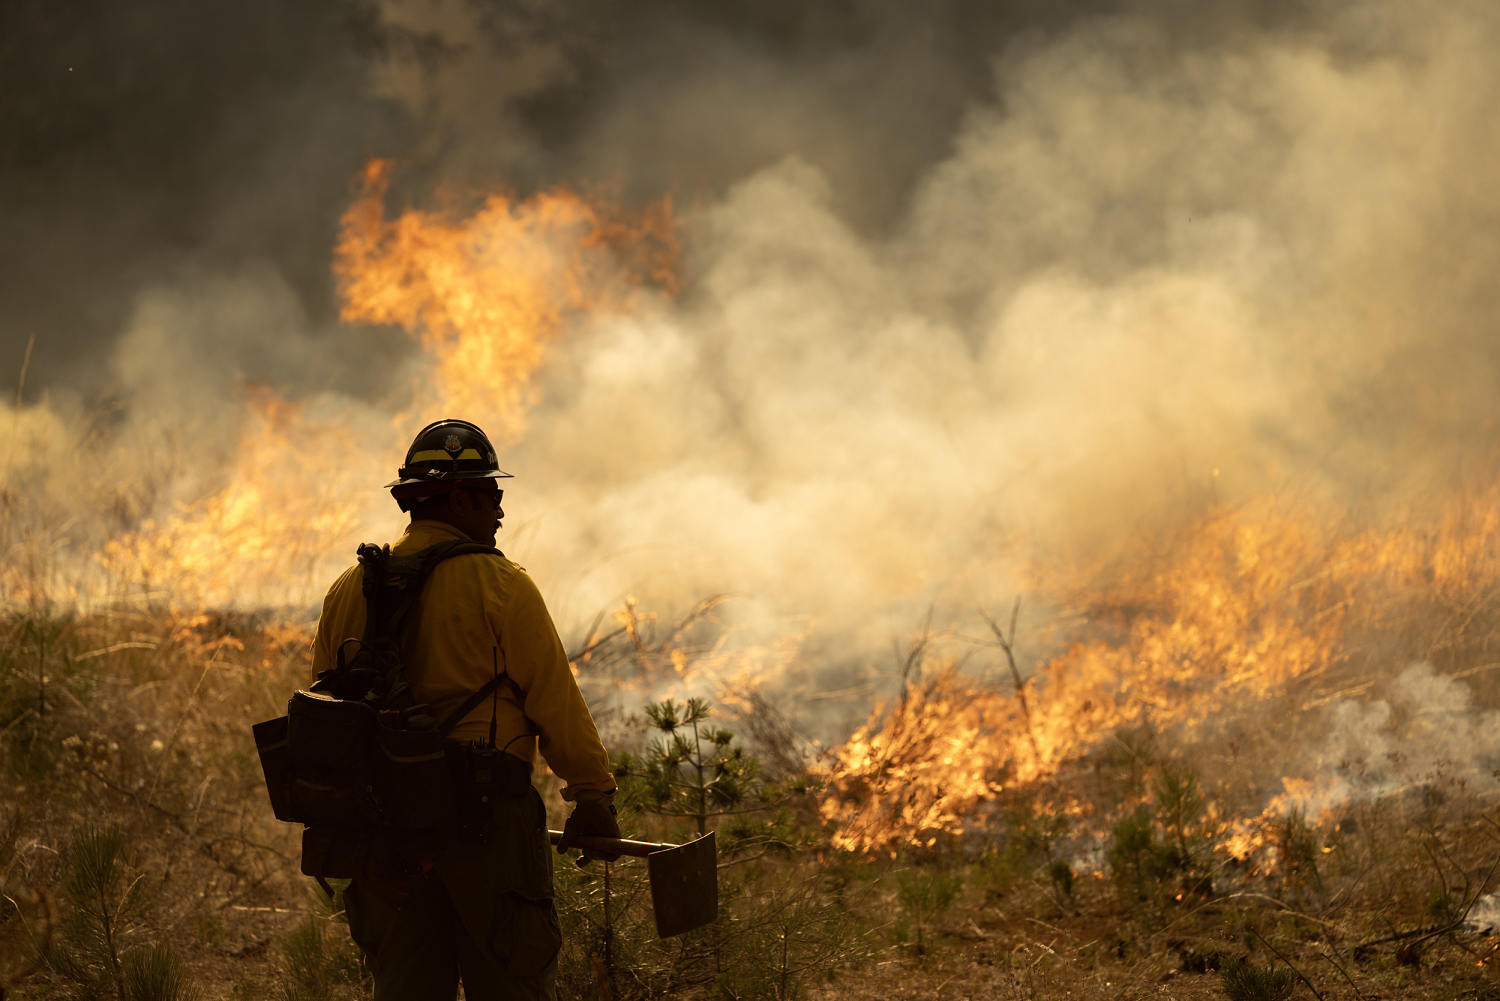 California wildfires rage on as firefighters work to contain them